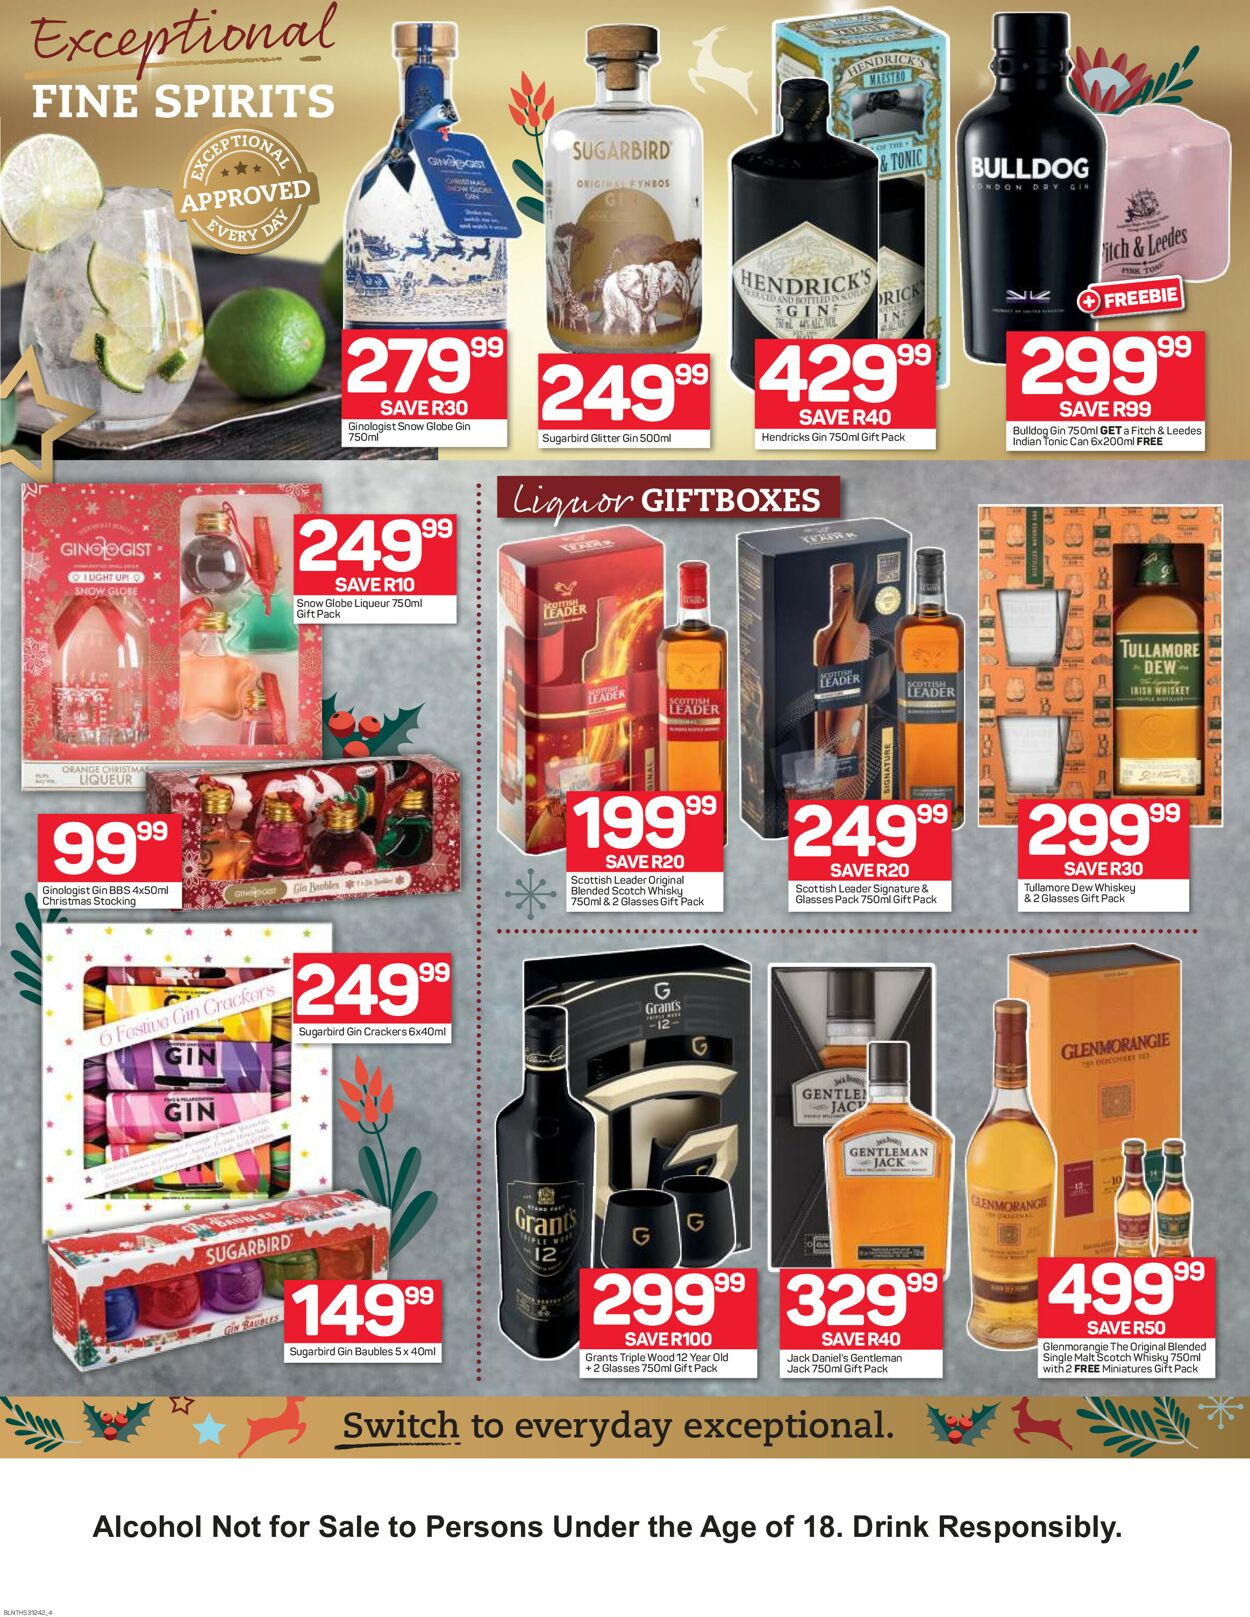 Pick n Pay Catalogue - 2022/10/24-2022/11/06 (Page 4)